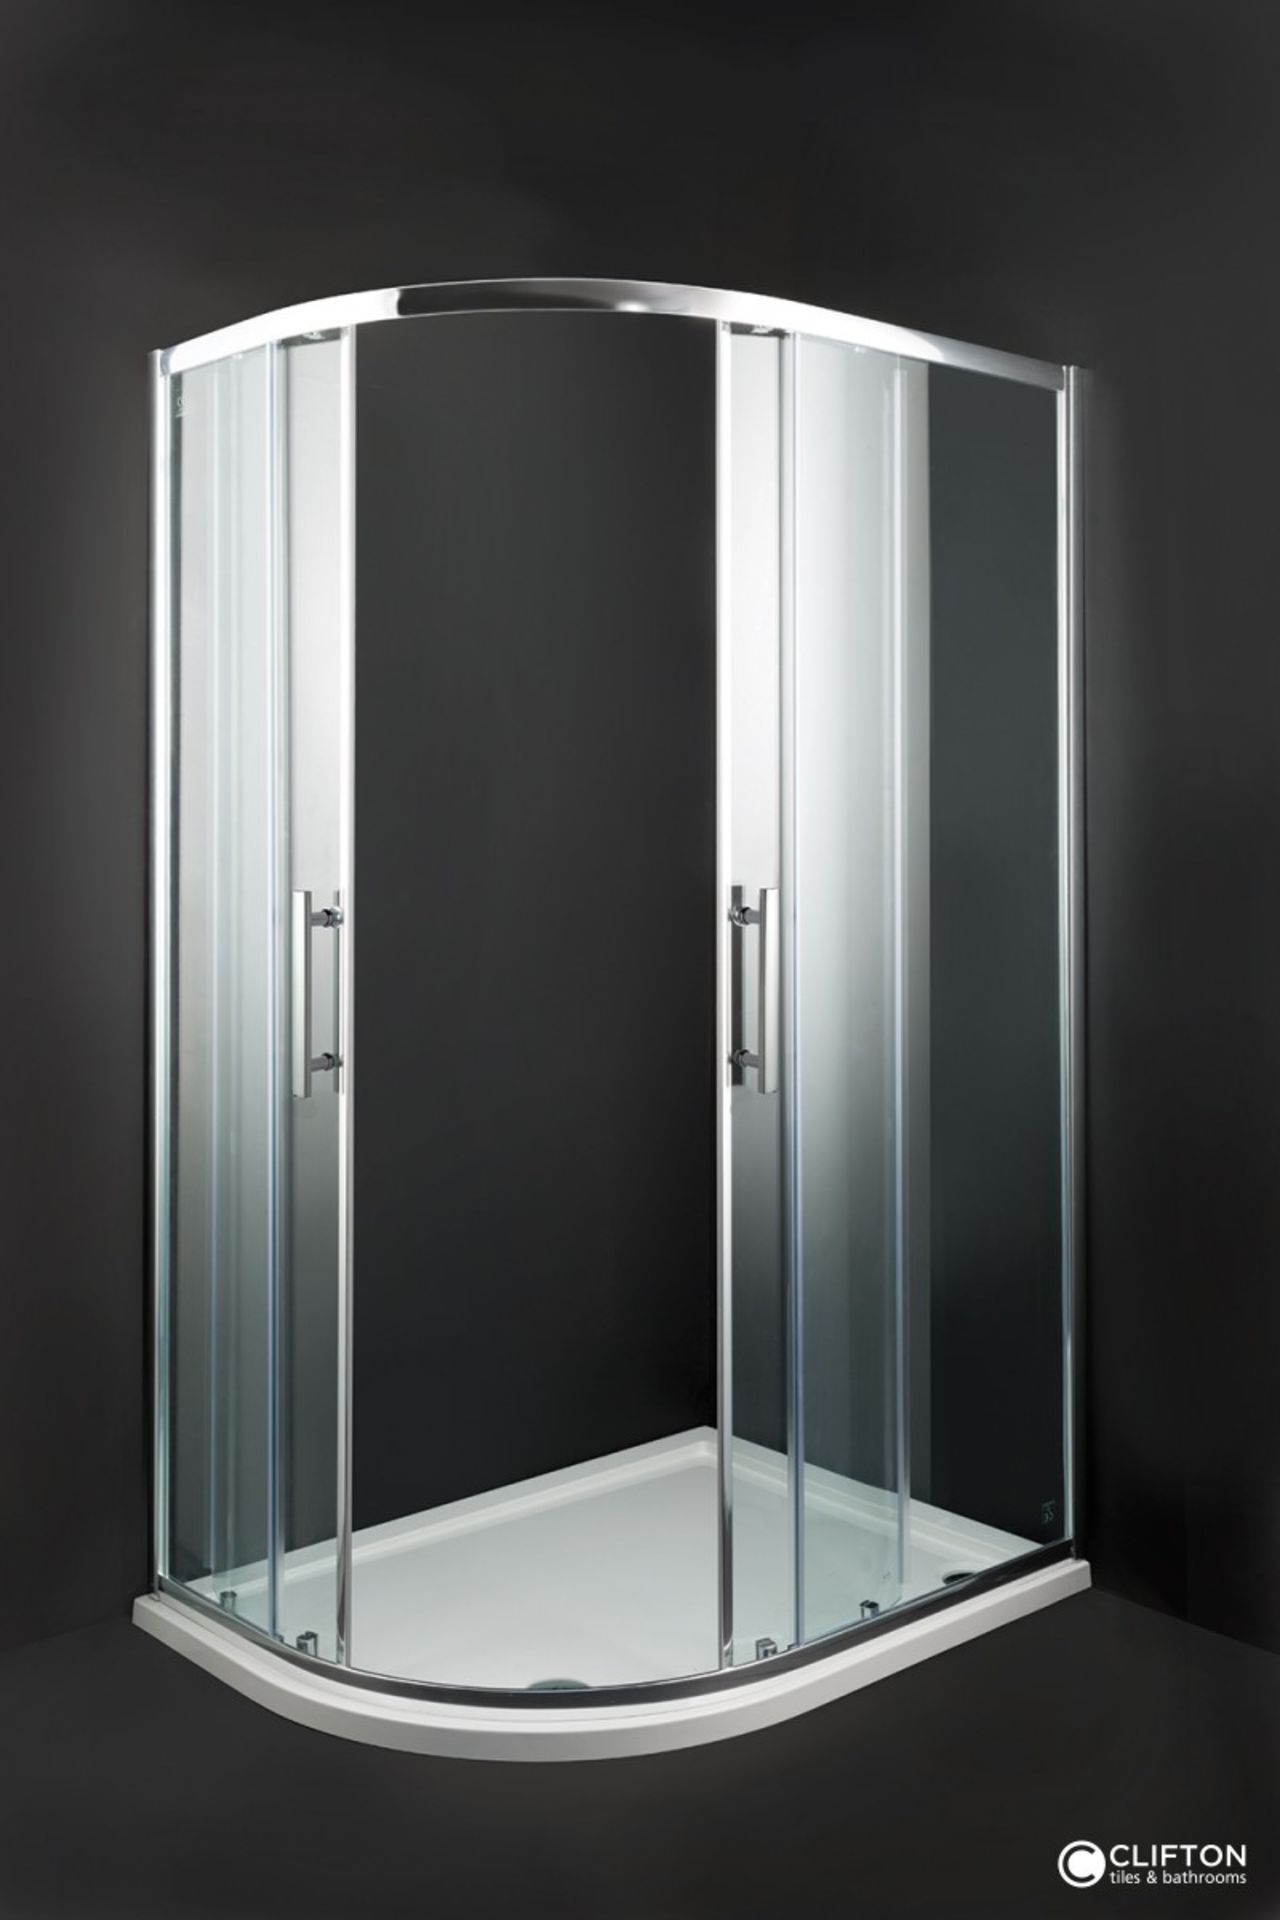 Luxury 1200x800x8mm Quadrant shower enclosure (just the enclosure not the tray), new in 2 boxes,